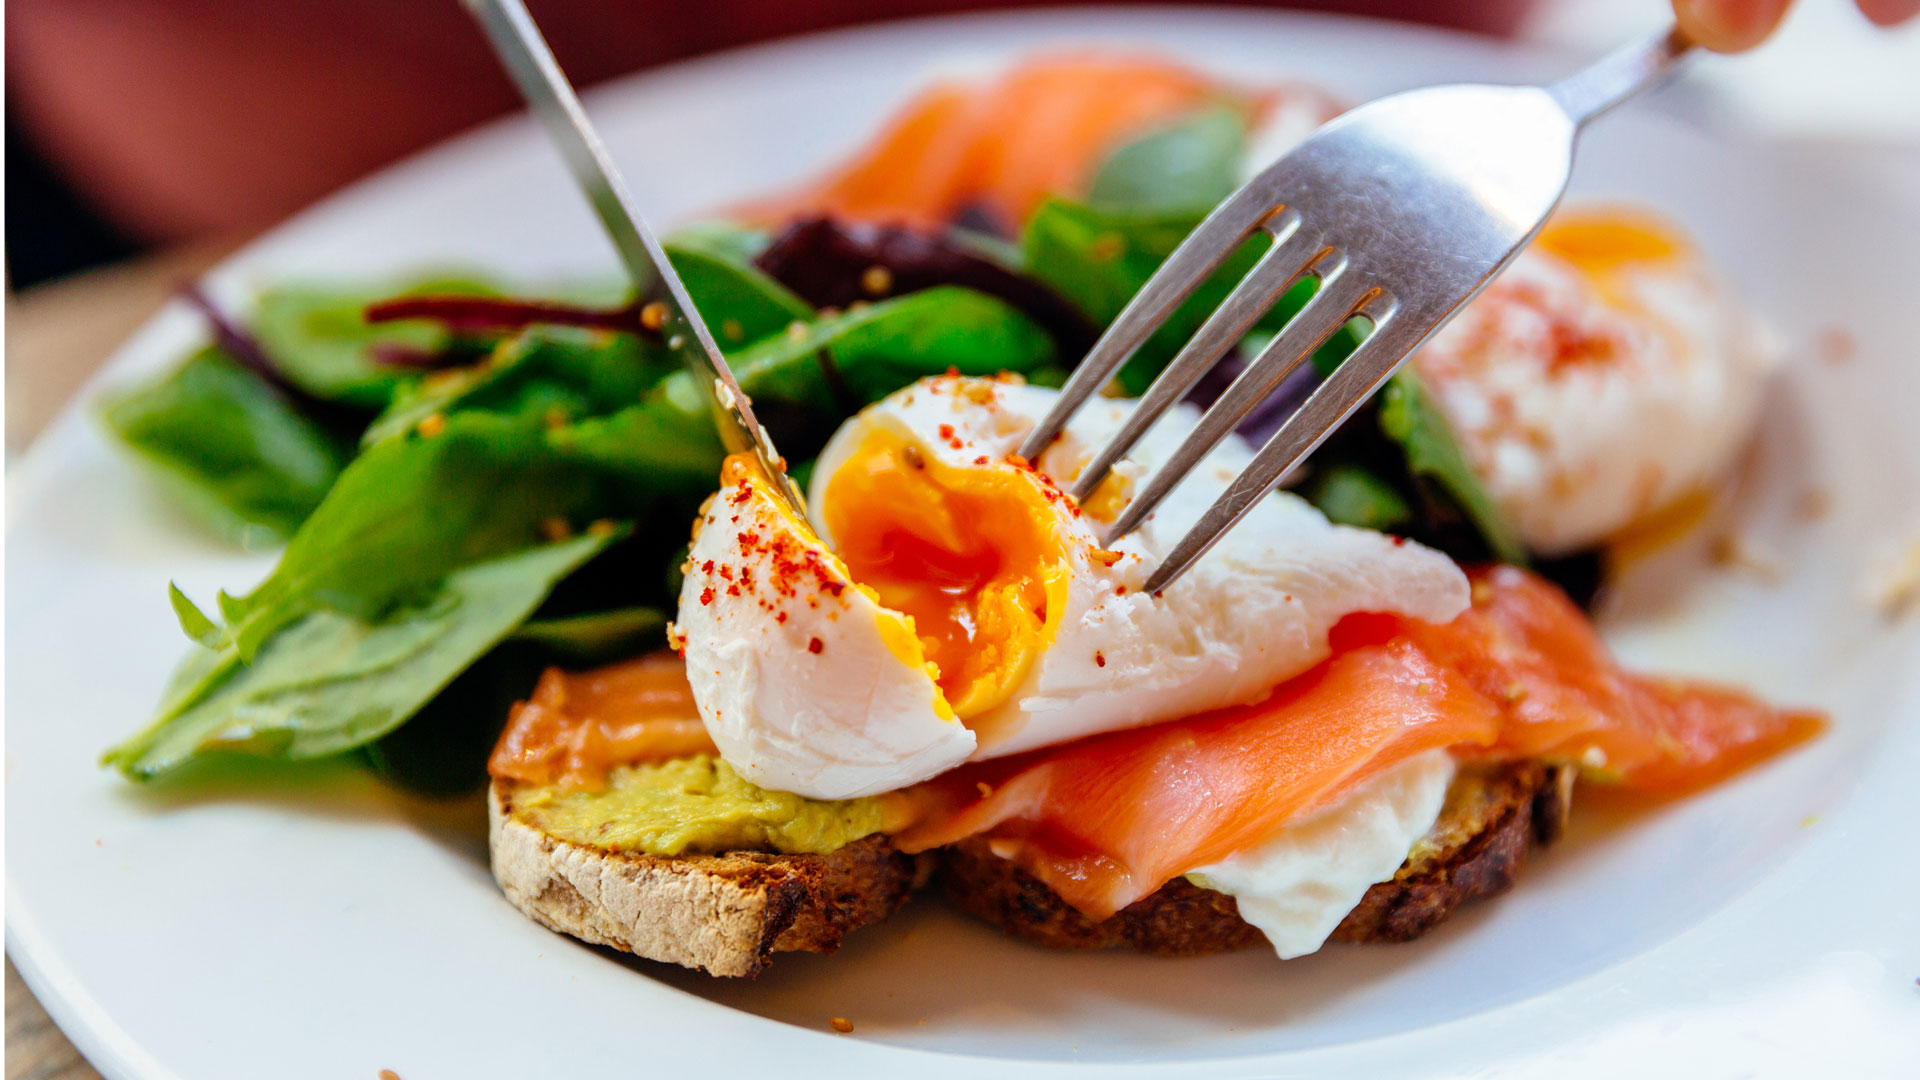 high protein foods: image shows egg and avocado toast